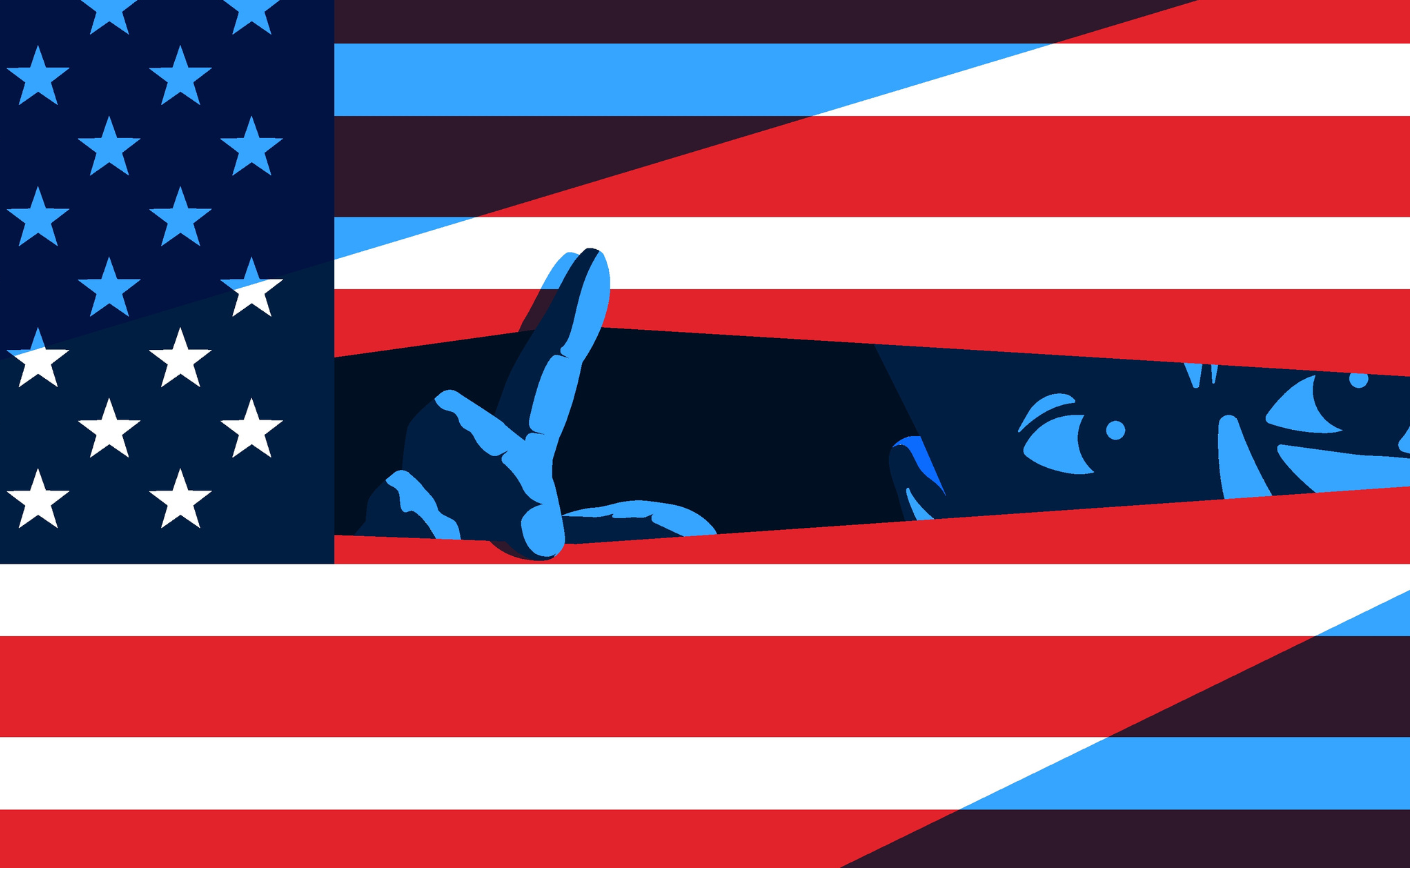 Illustration of a man peeking through the American flag as if the stripes were blinds